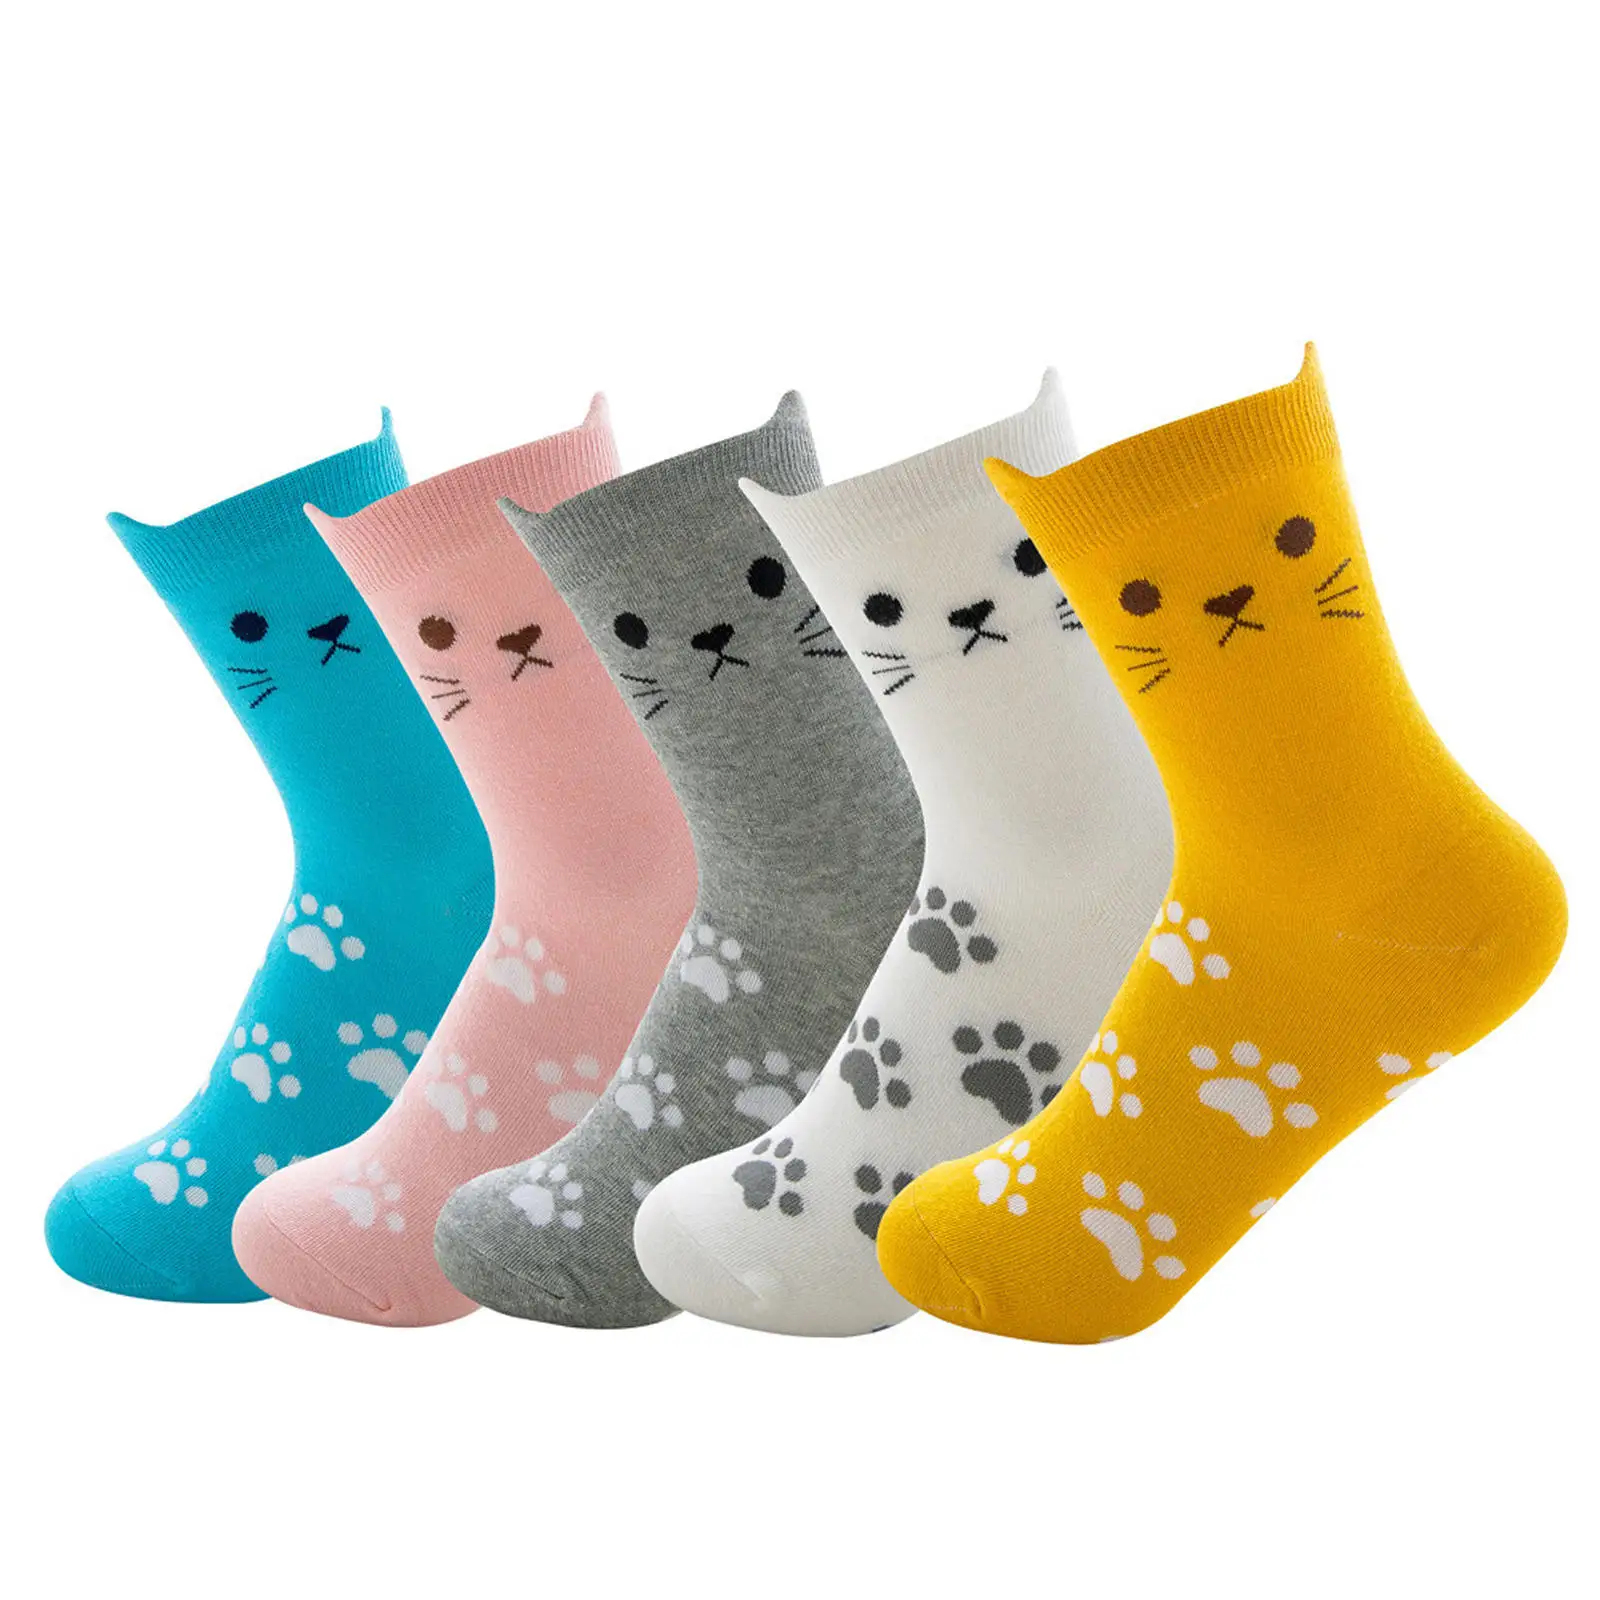 5 Pairs Ladies Womens Socks Cotton Cute Stretch Funny Casual Animal Design Novelty Socks